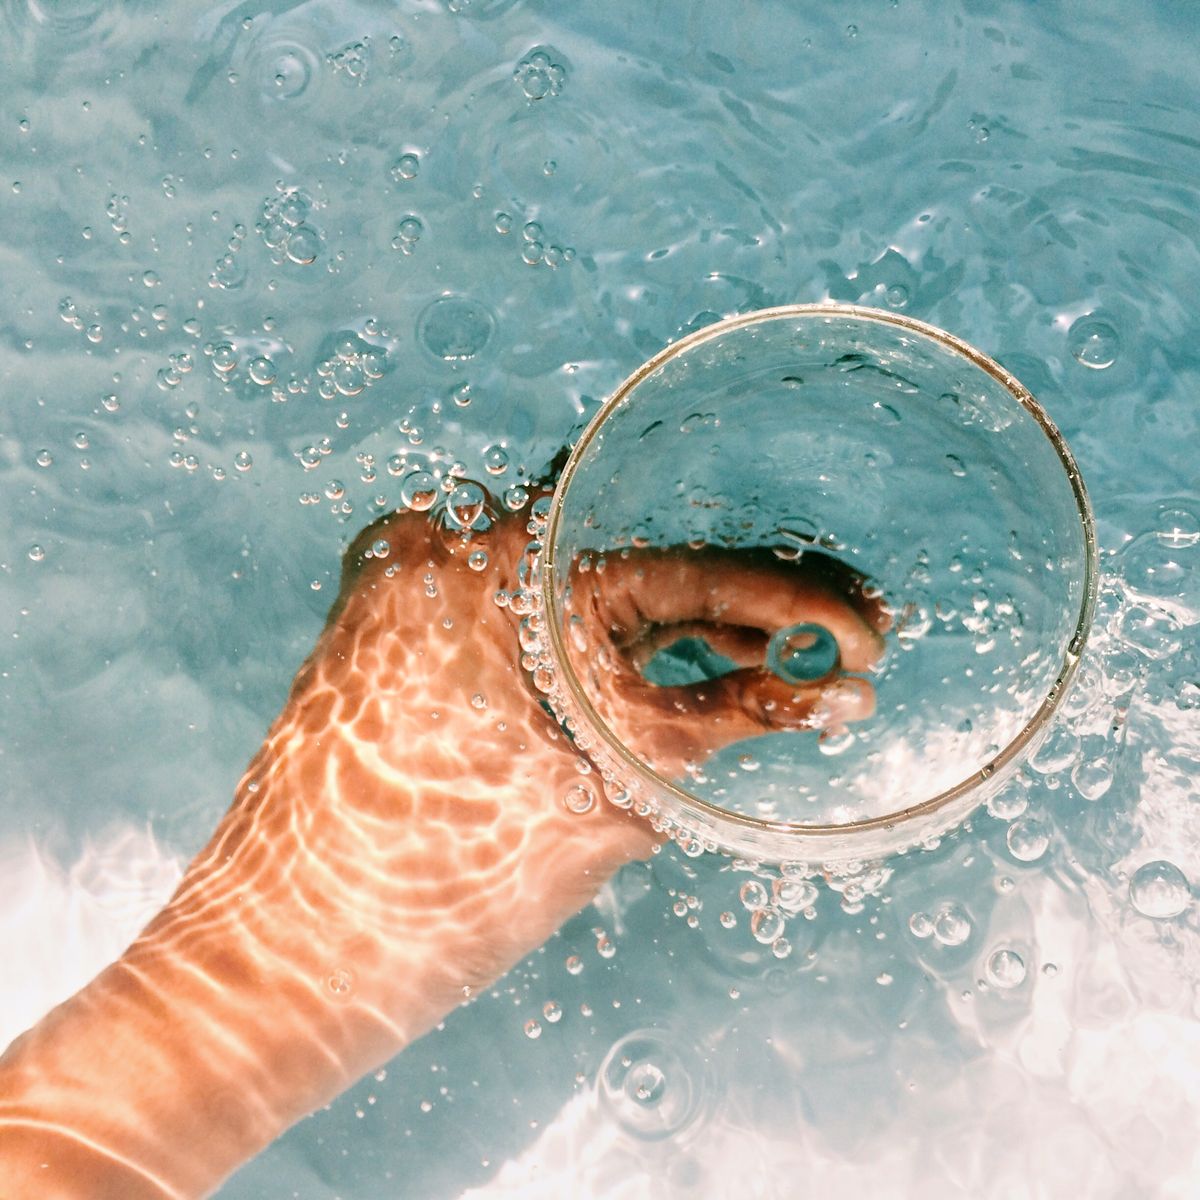 cropped hand of woman holding wineglass in swimming pool